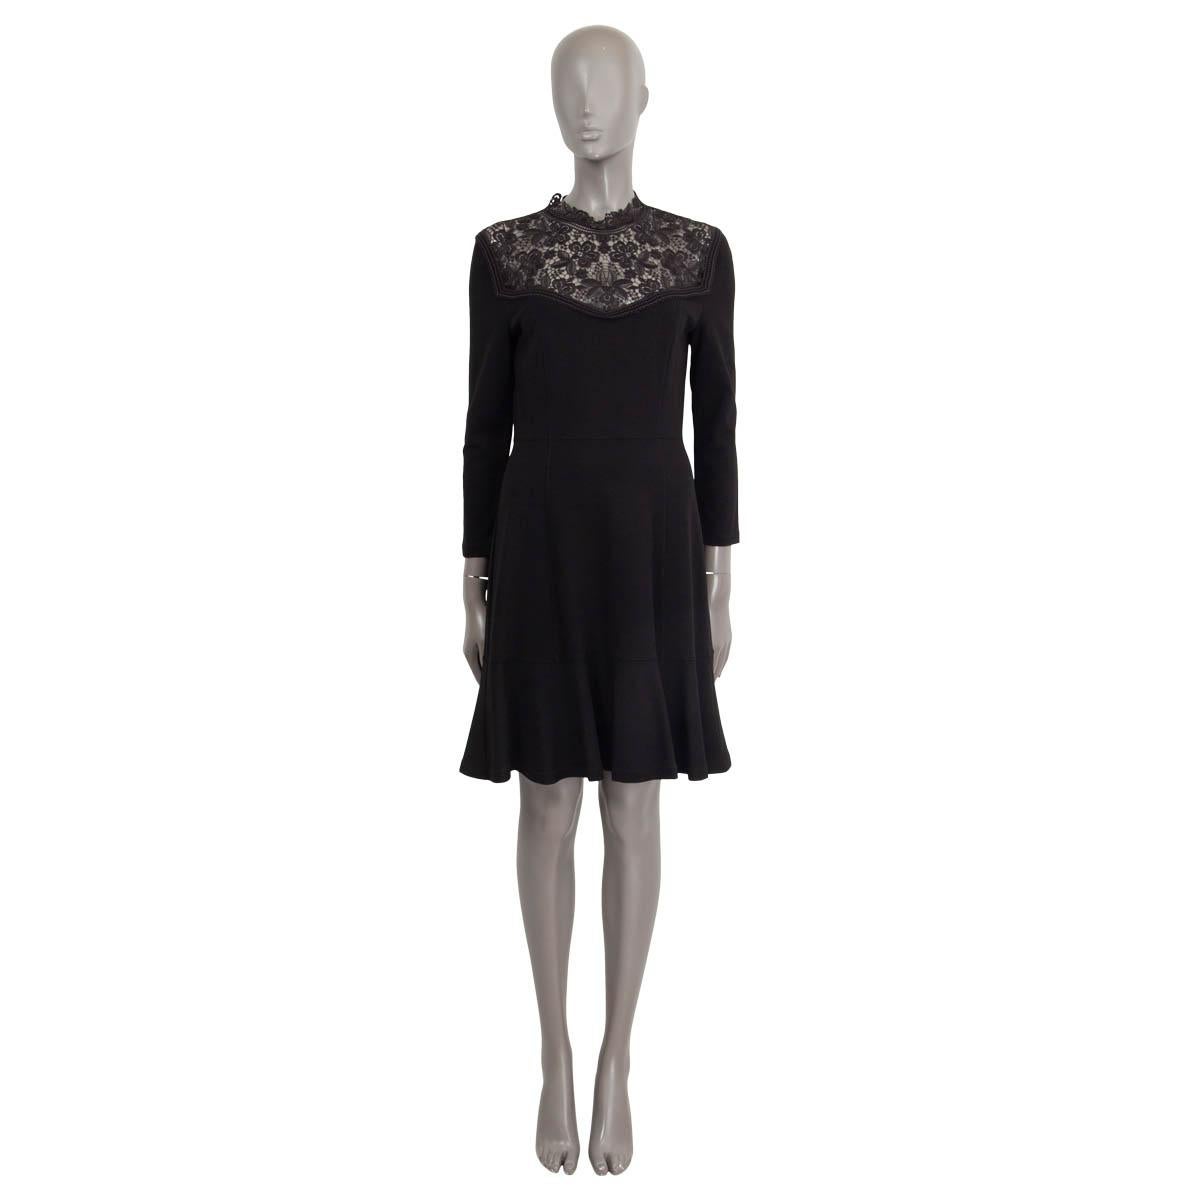 100% authentic Erdem 2016 crochet paneled dress in black viscose (72%), polyamide (23%) and elastane (5%). Opens with a zipper on the back. Unlined. Has been worn and is in excellent condition.

Measurements
Tag Size	12
Size	M
Shoulder Width	41cm